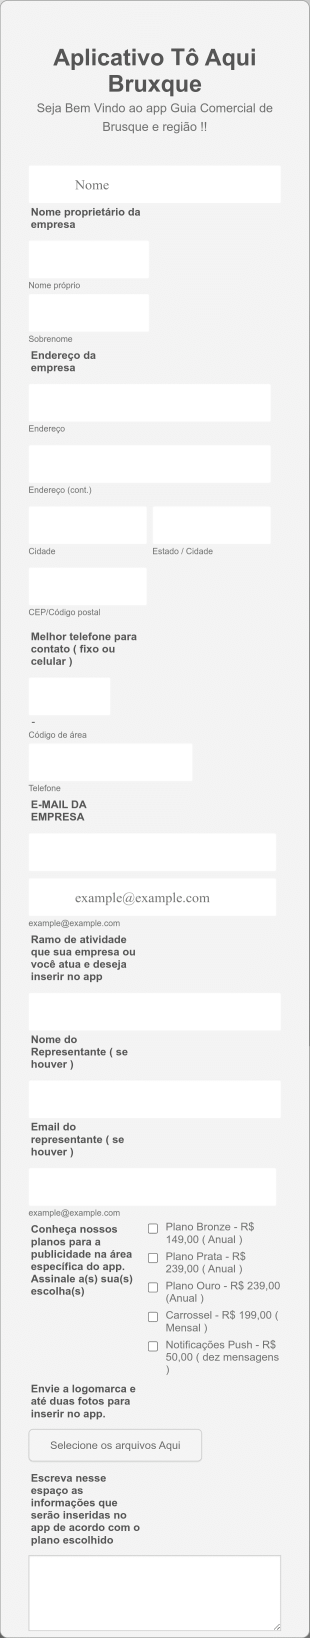 Business Registration Form In Portuguese Form Template